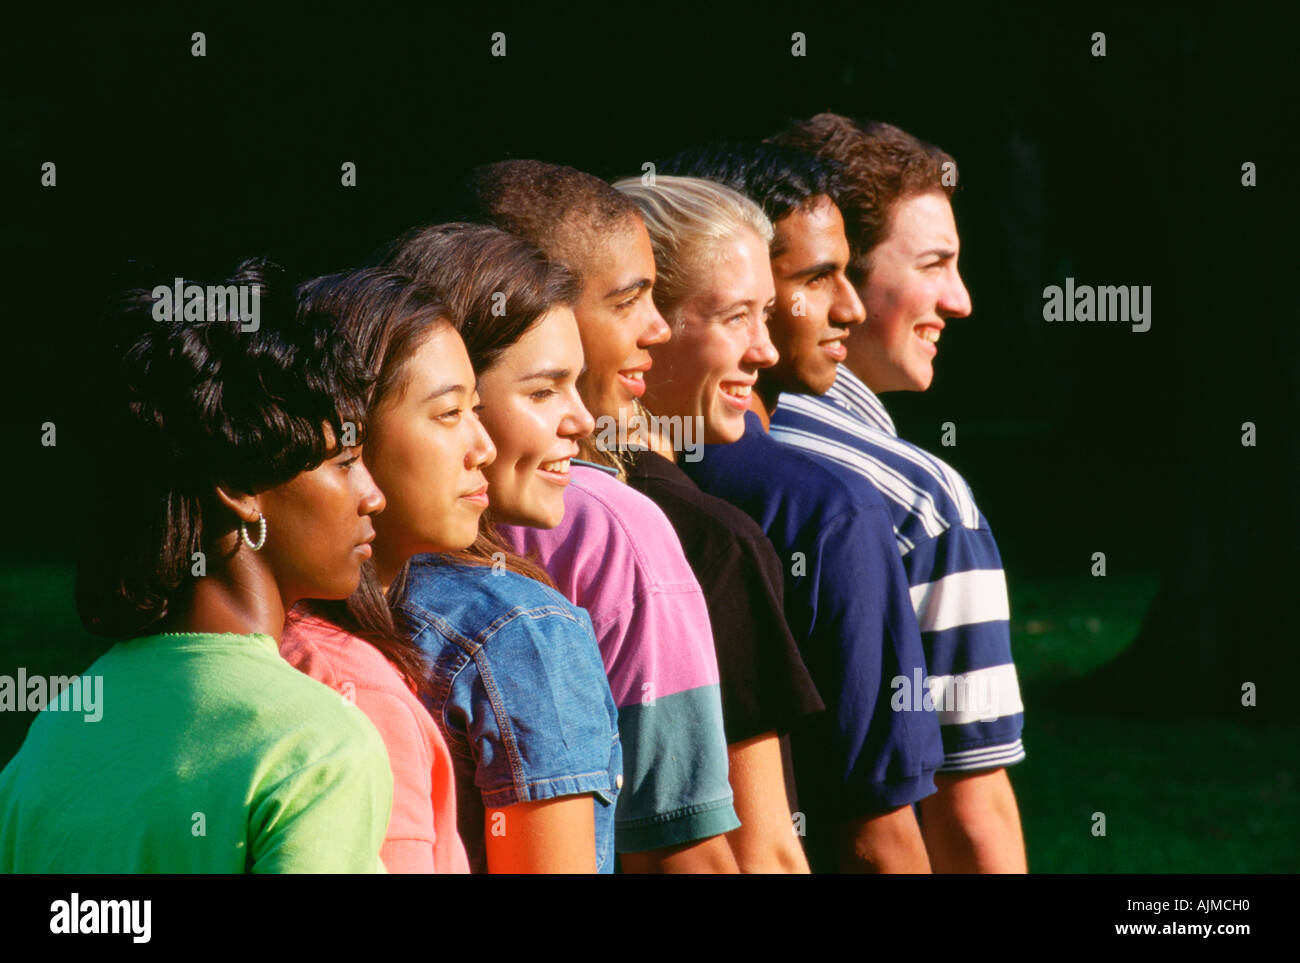 Group of diverse teens lined up in a row Stock Photo